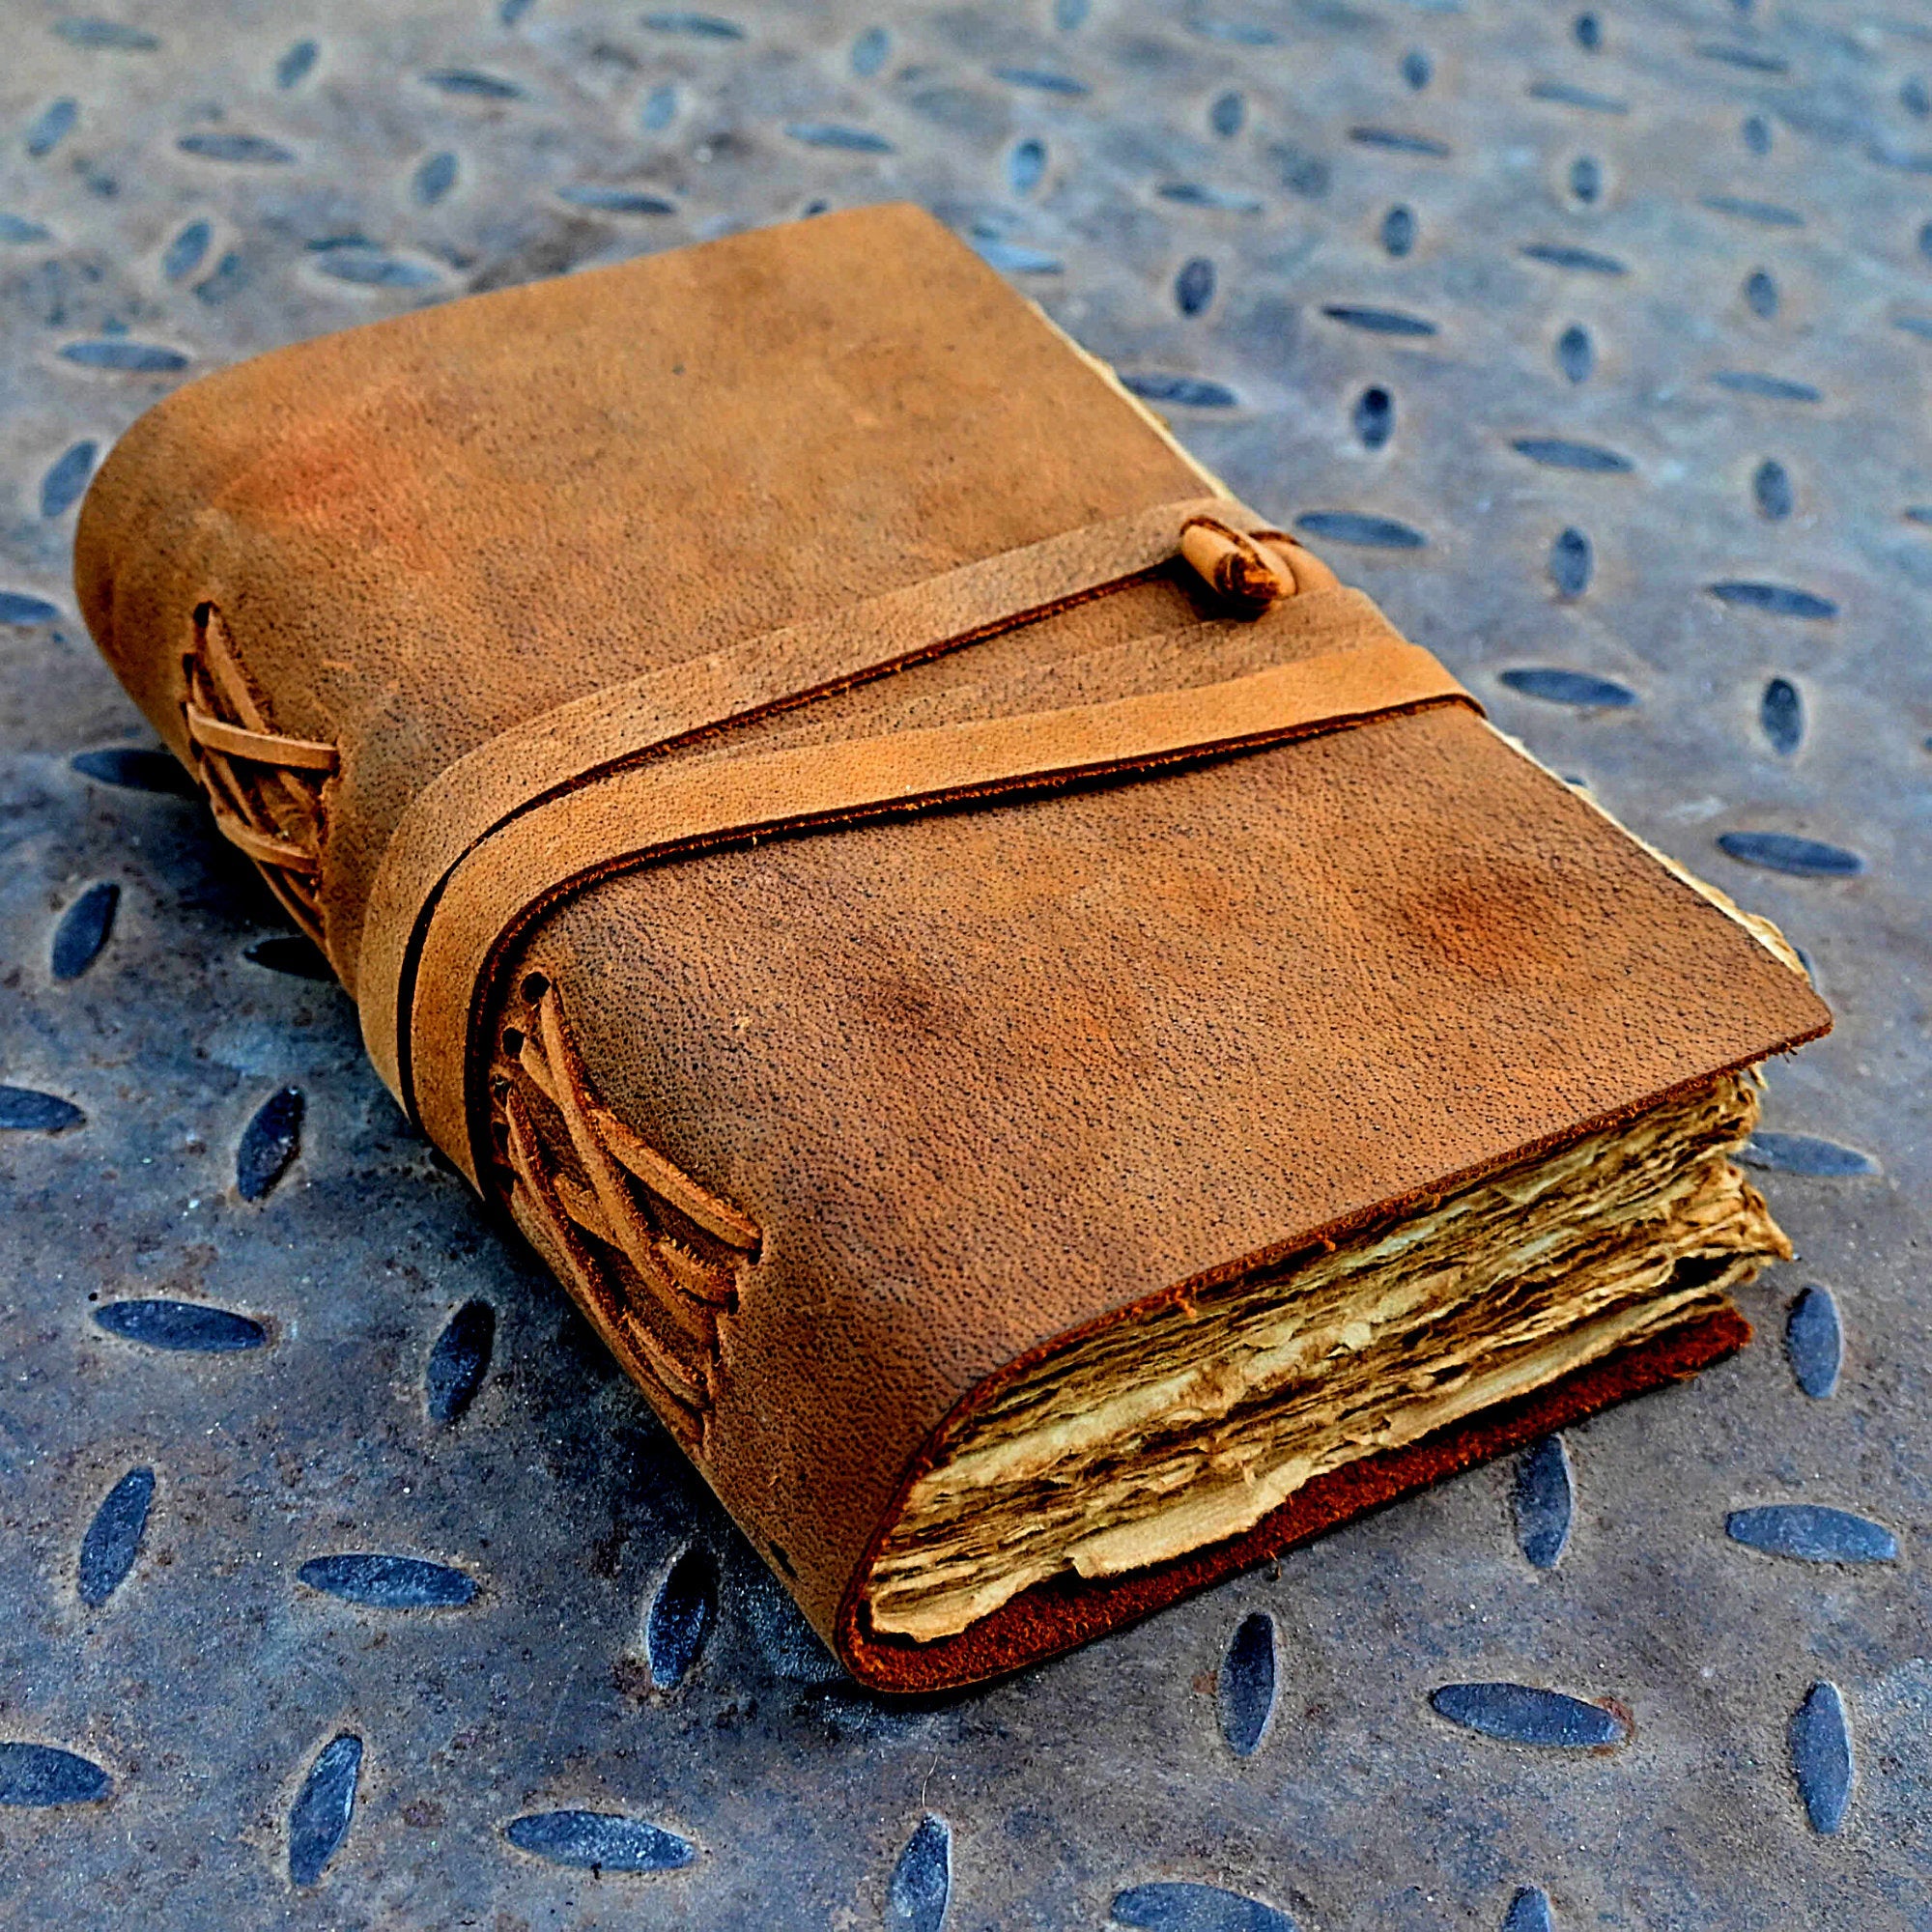 Vintage Style Leather Journal, Rustic Weathered Leather, Antique